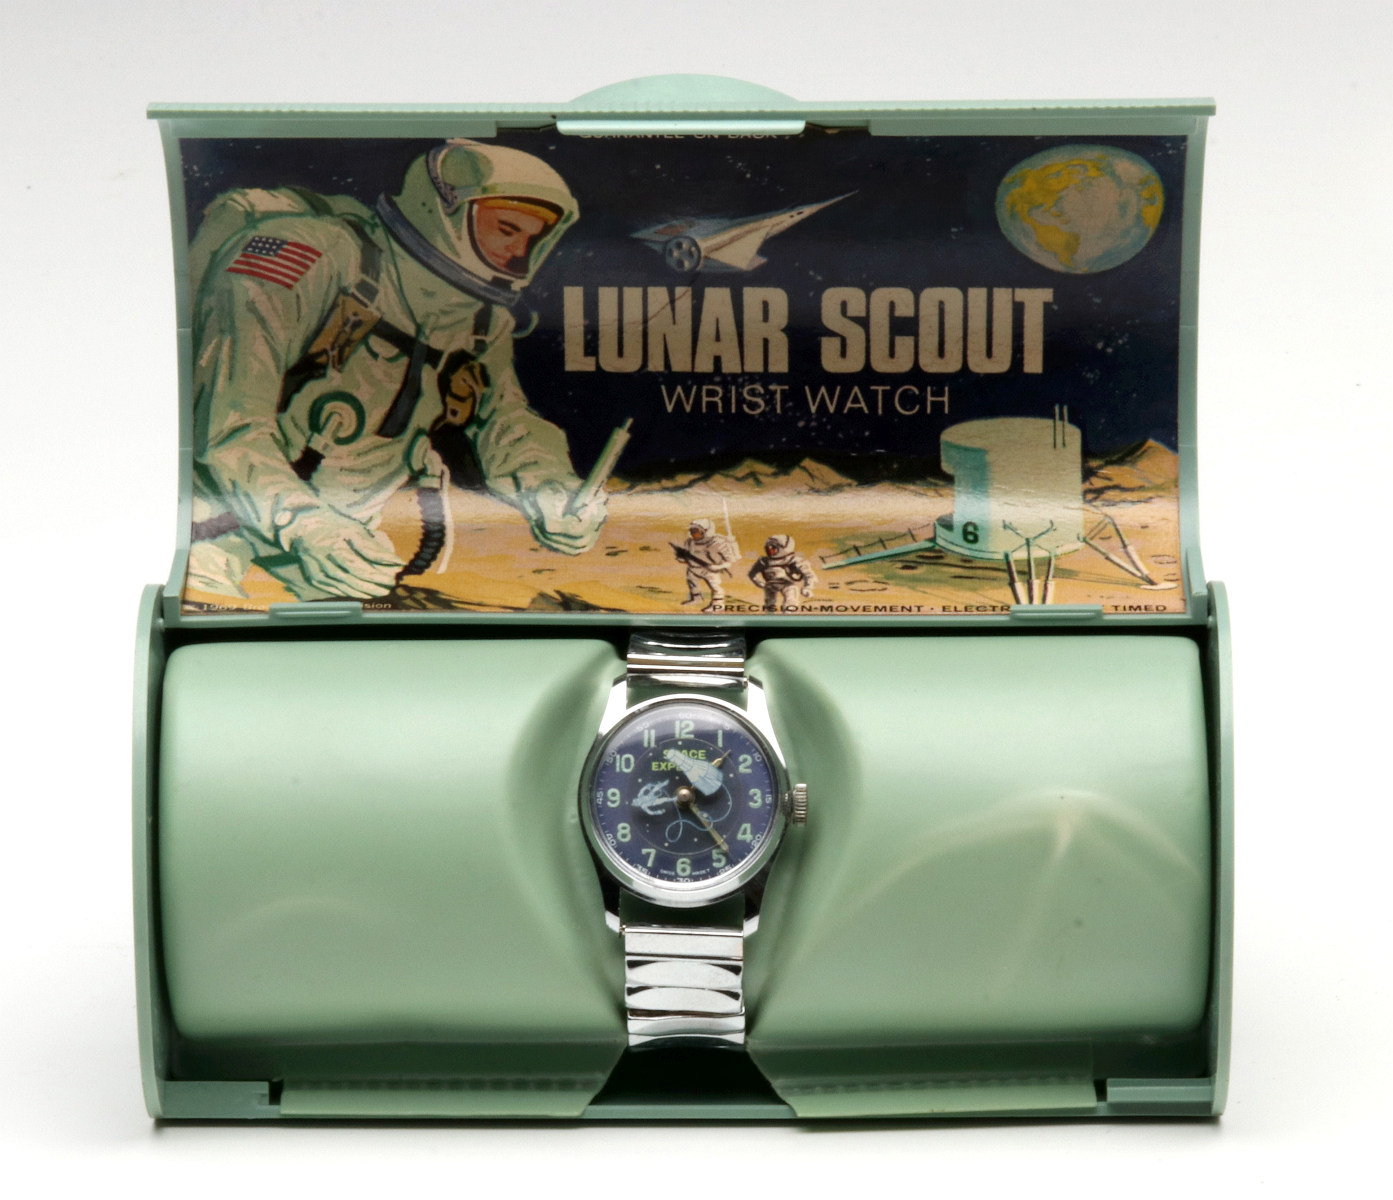 A RARE INTERESTING 1969 'LUNAR SCOUT' YOUTH WRISTWATCH